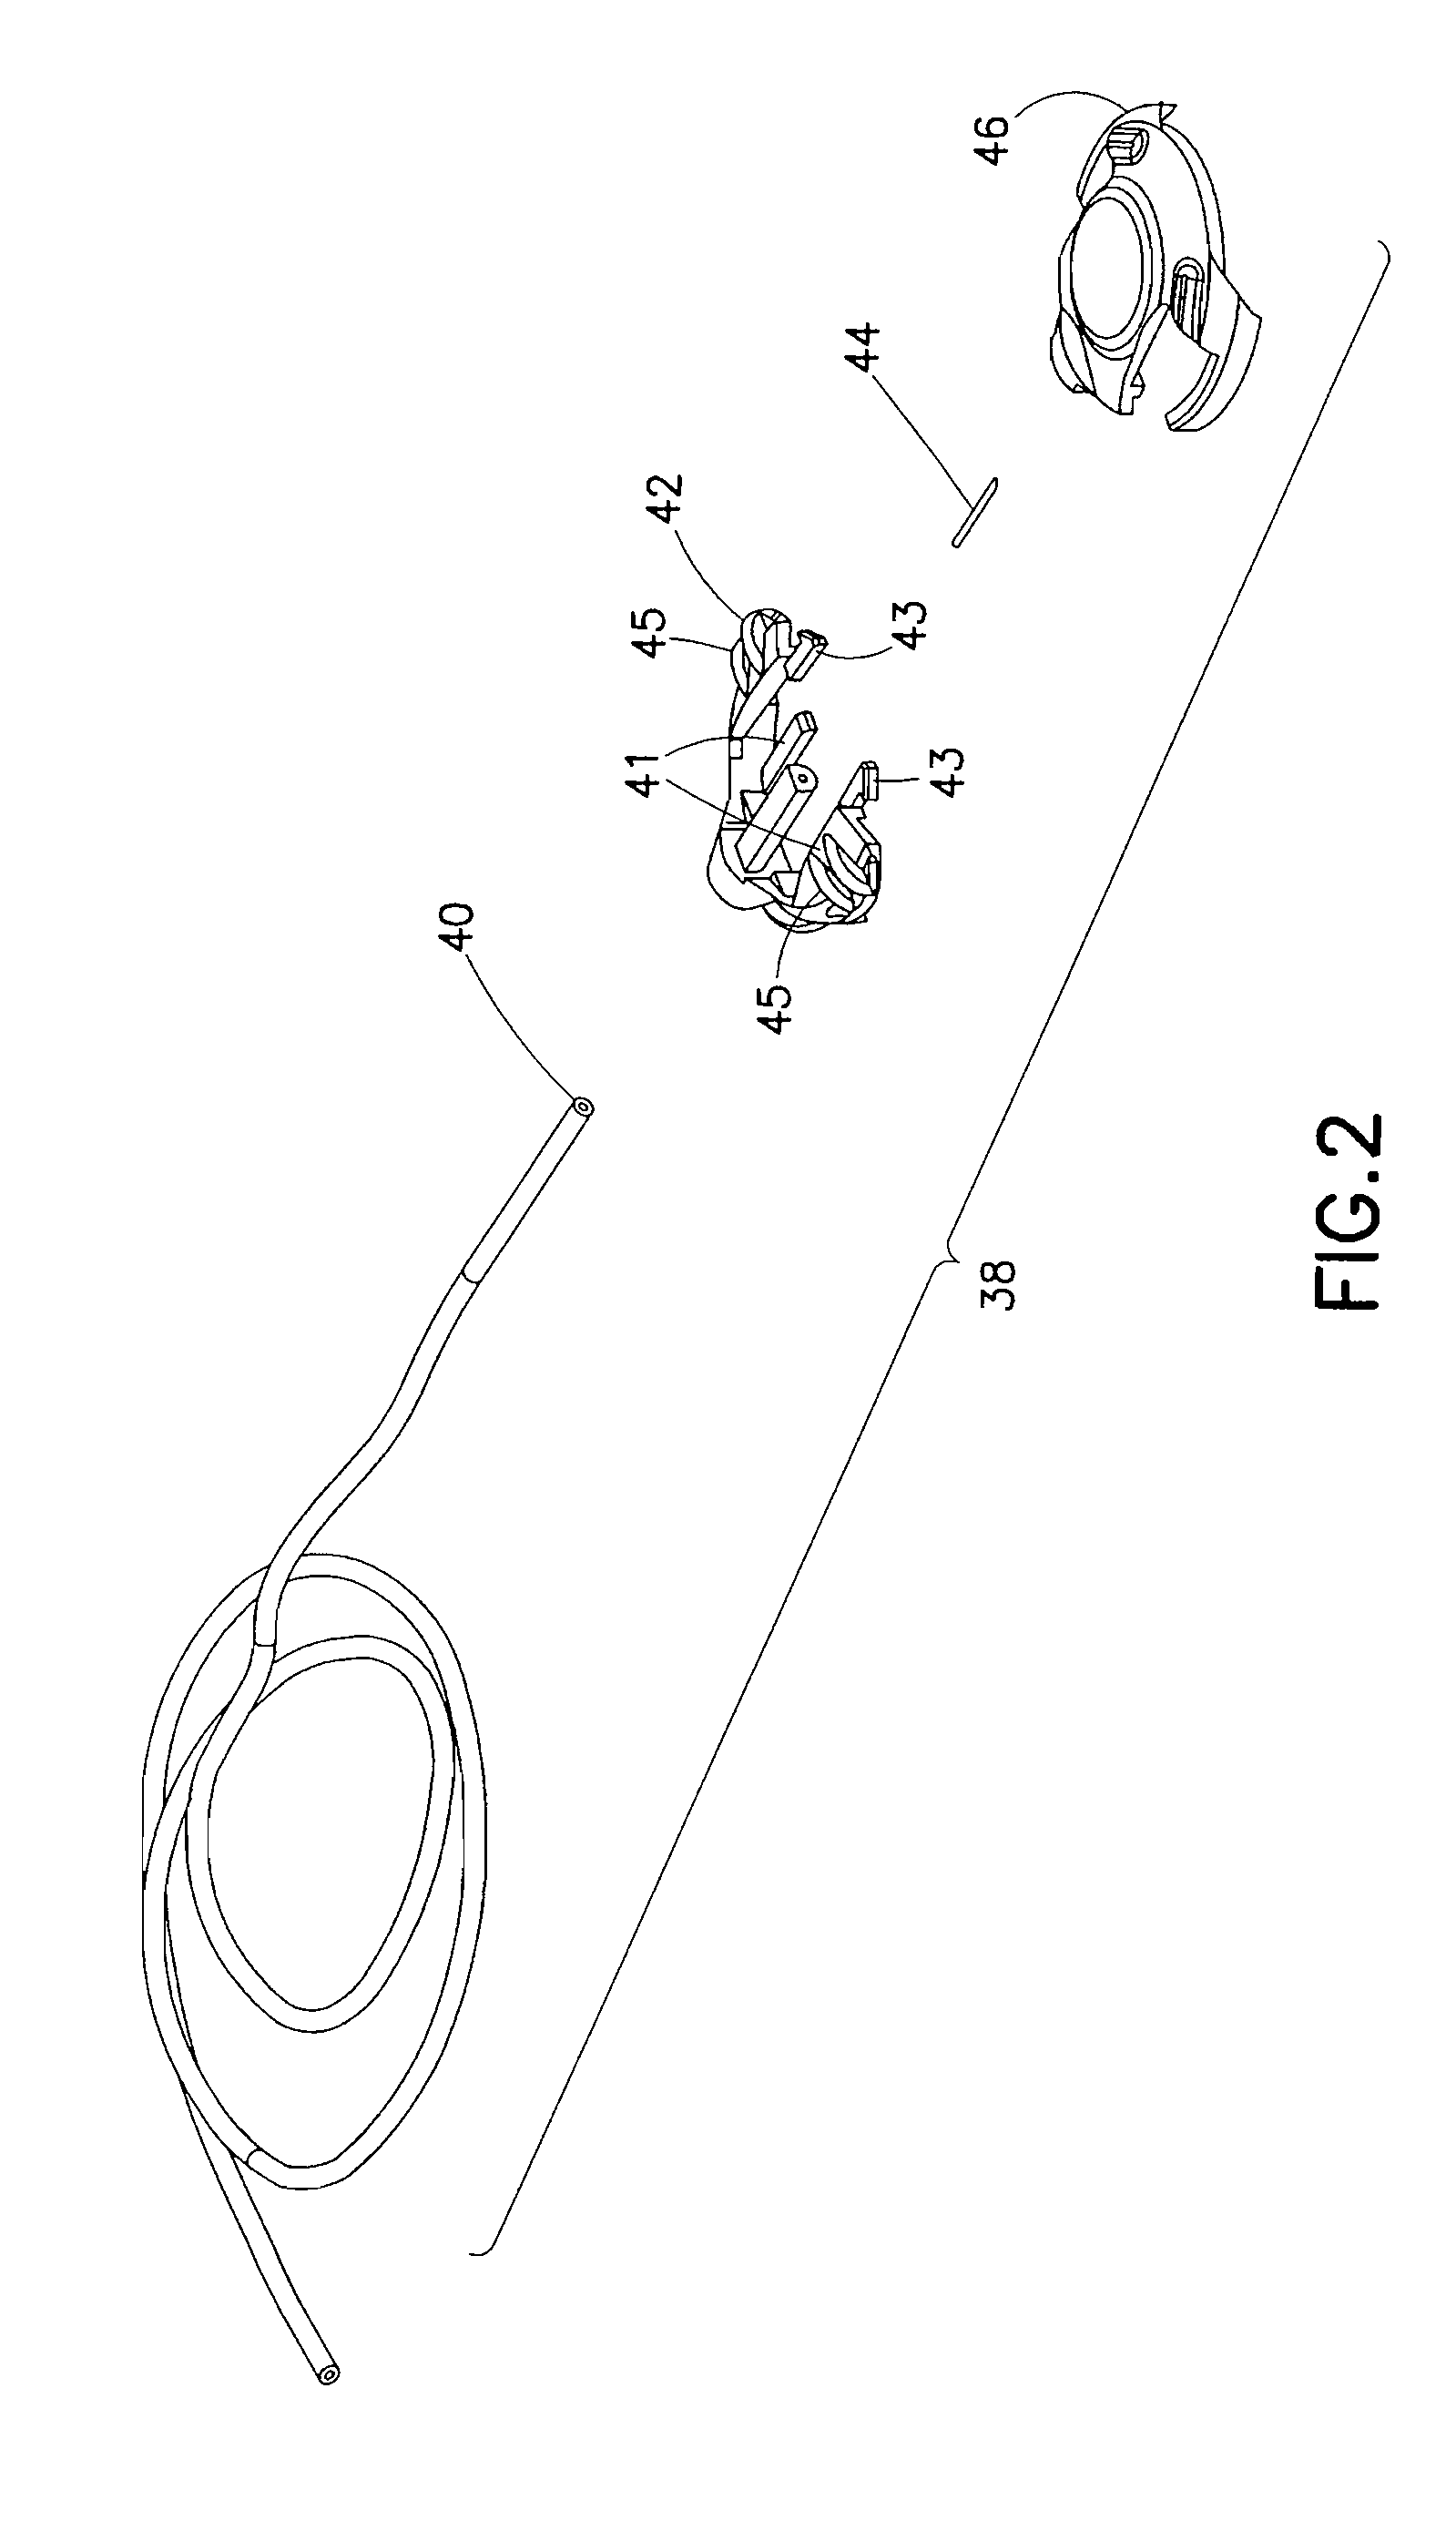 Insulin Pump Dermal Infusion Set Having Partially Integrated Mechanized Cannula Insertion With Disposable Activation Portion